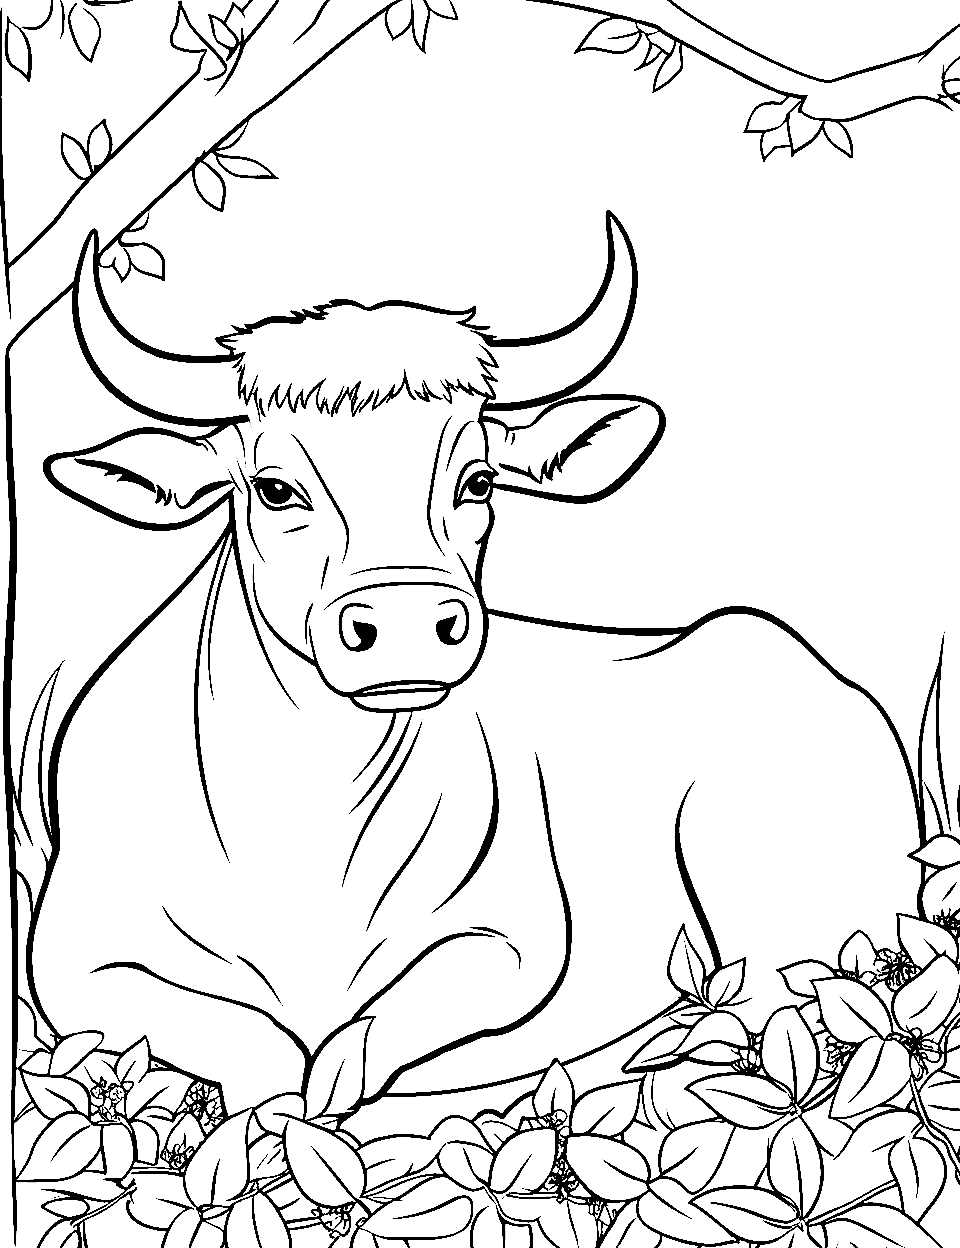 Cow Resting Coloring Page - A cow peacefully resting in a basic, easy-to-color field.